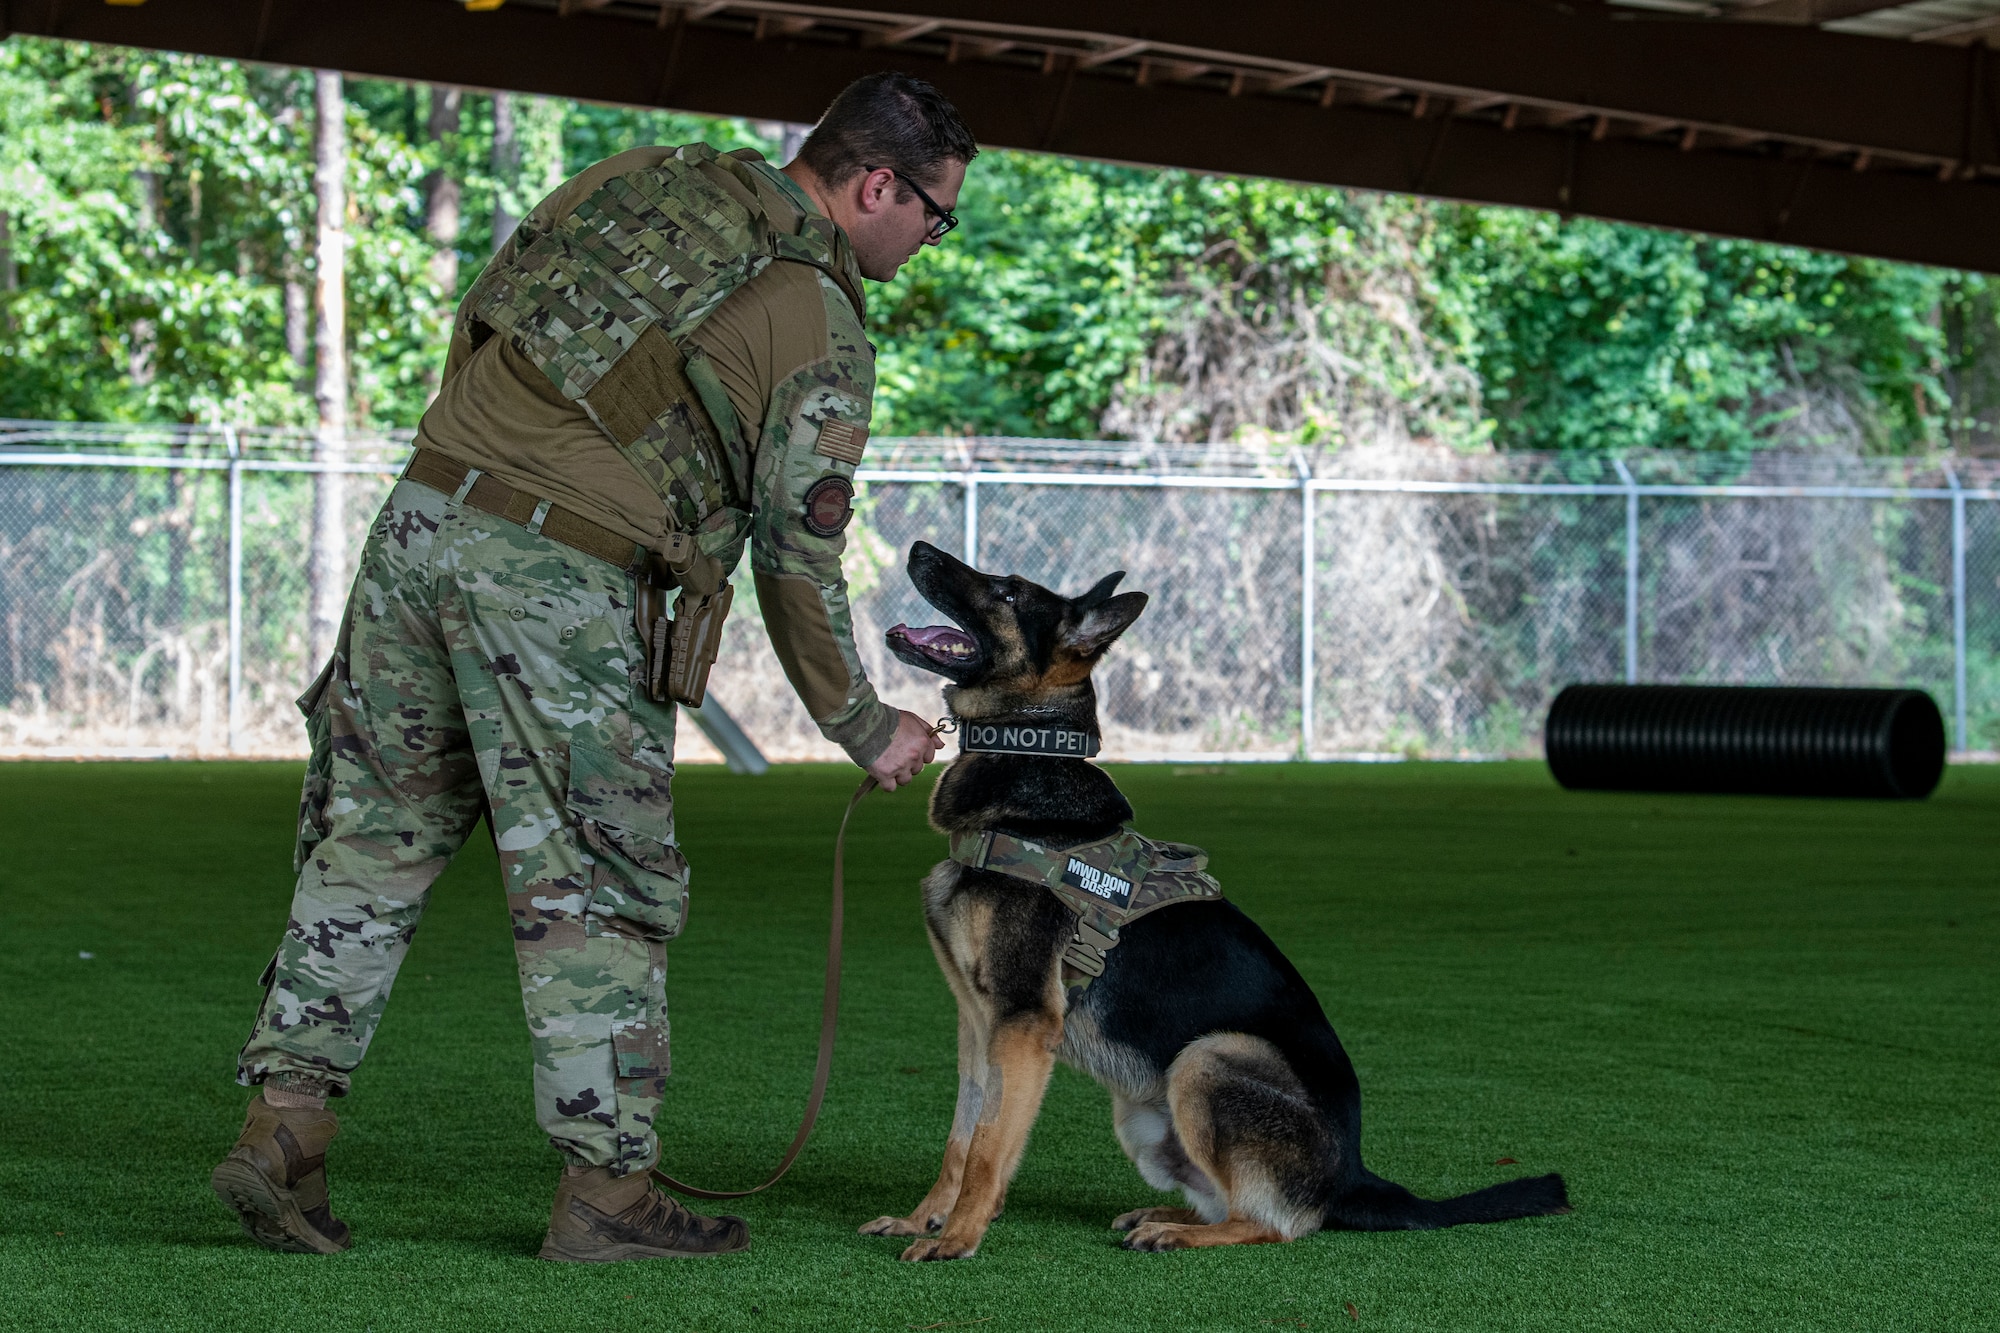 Staff Sgt. Kyle Johnson, 4th Security Forces Squadron military working dog handler, conducts obedience training with MWD Donni at Seymour Johnson Air Force Base, North Carolina, July 6, 2022. MWDs are required to complete obedience, obstacle course, scout, building search and a session of gunfire training to receive a patrol certification. (U.S. Air Force photo by Airman 1st Class Sabrina Fuller)